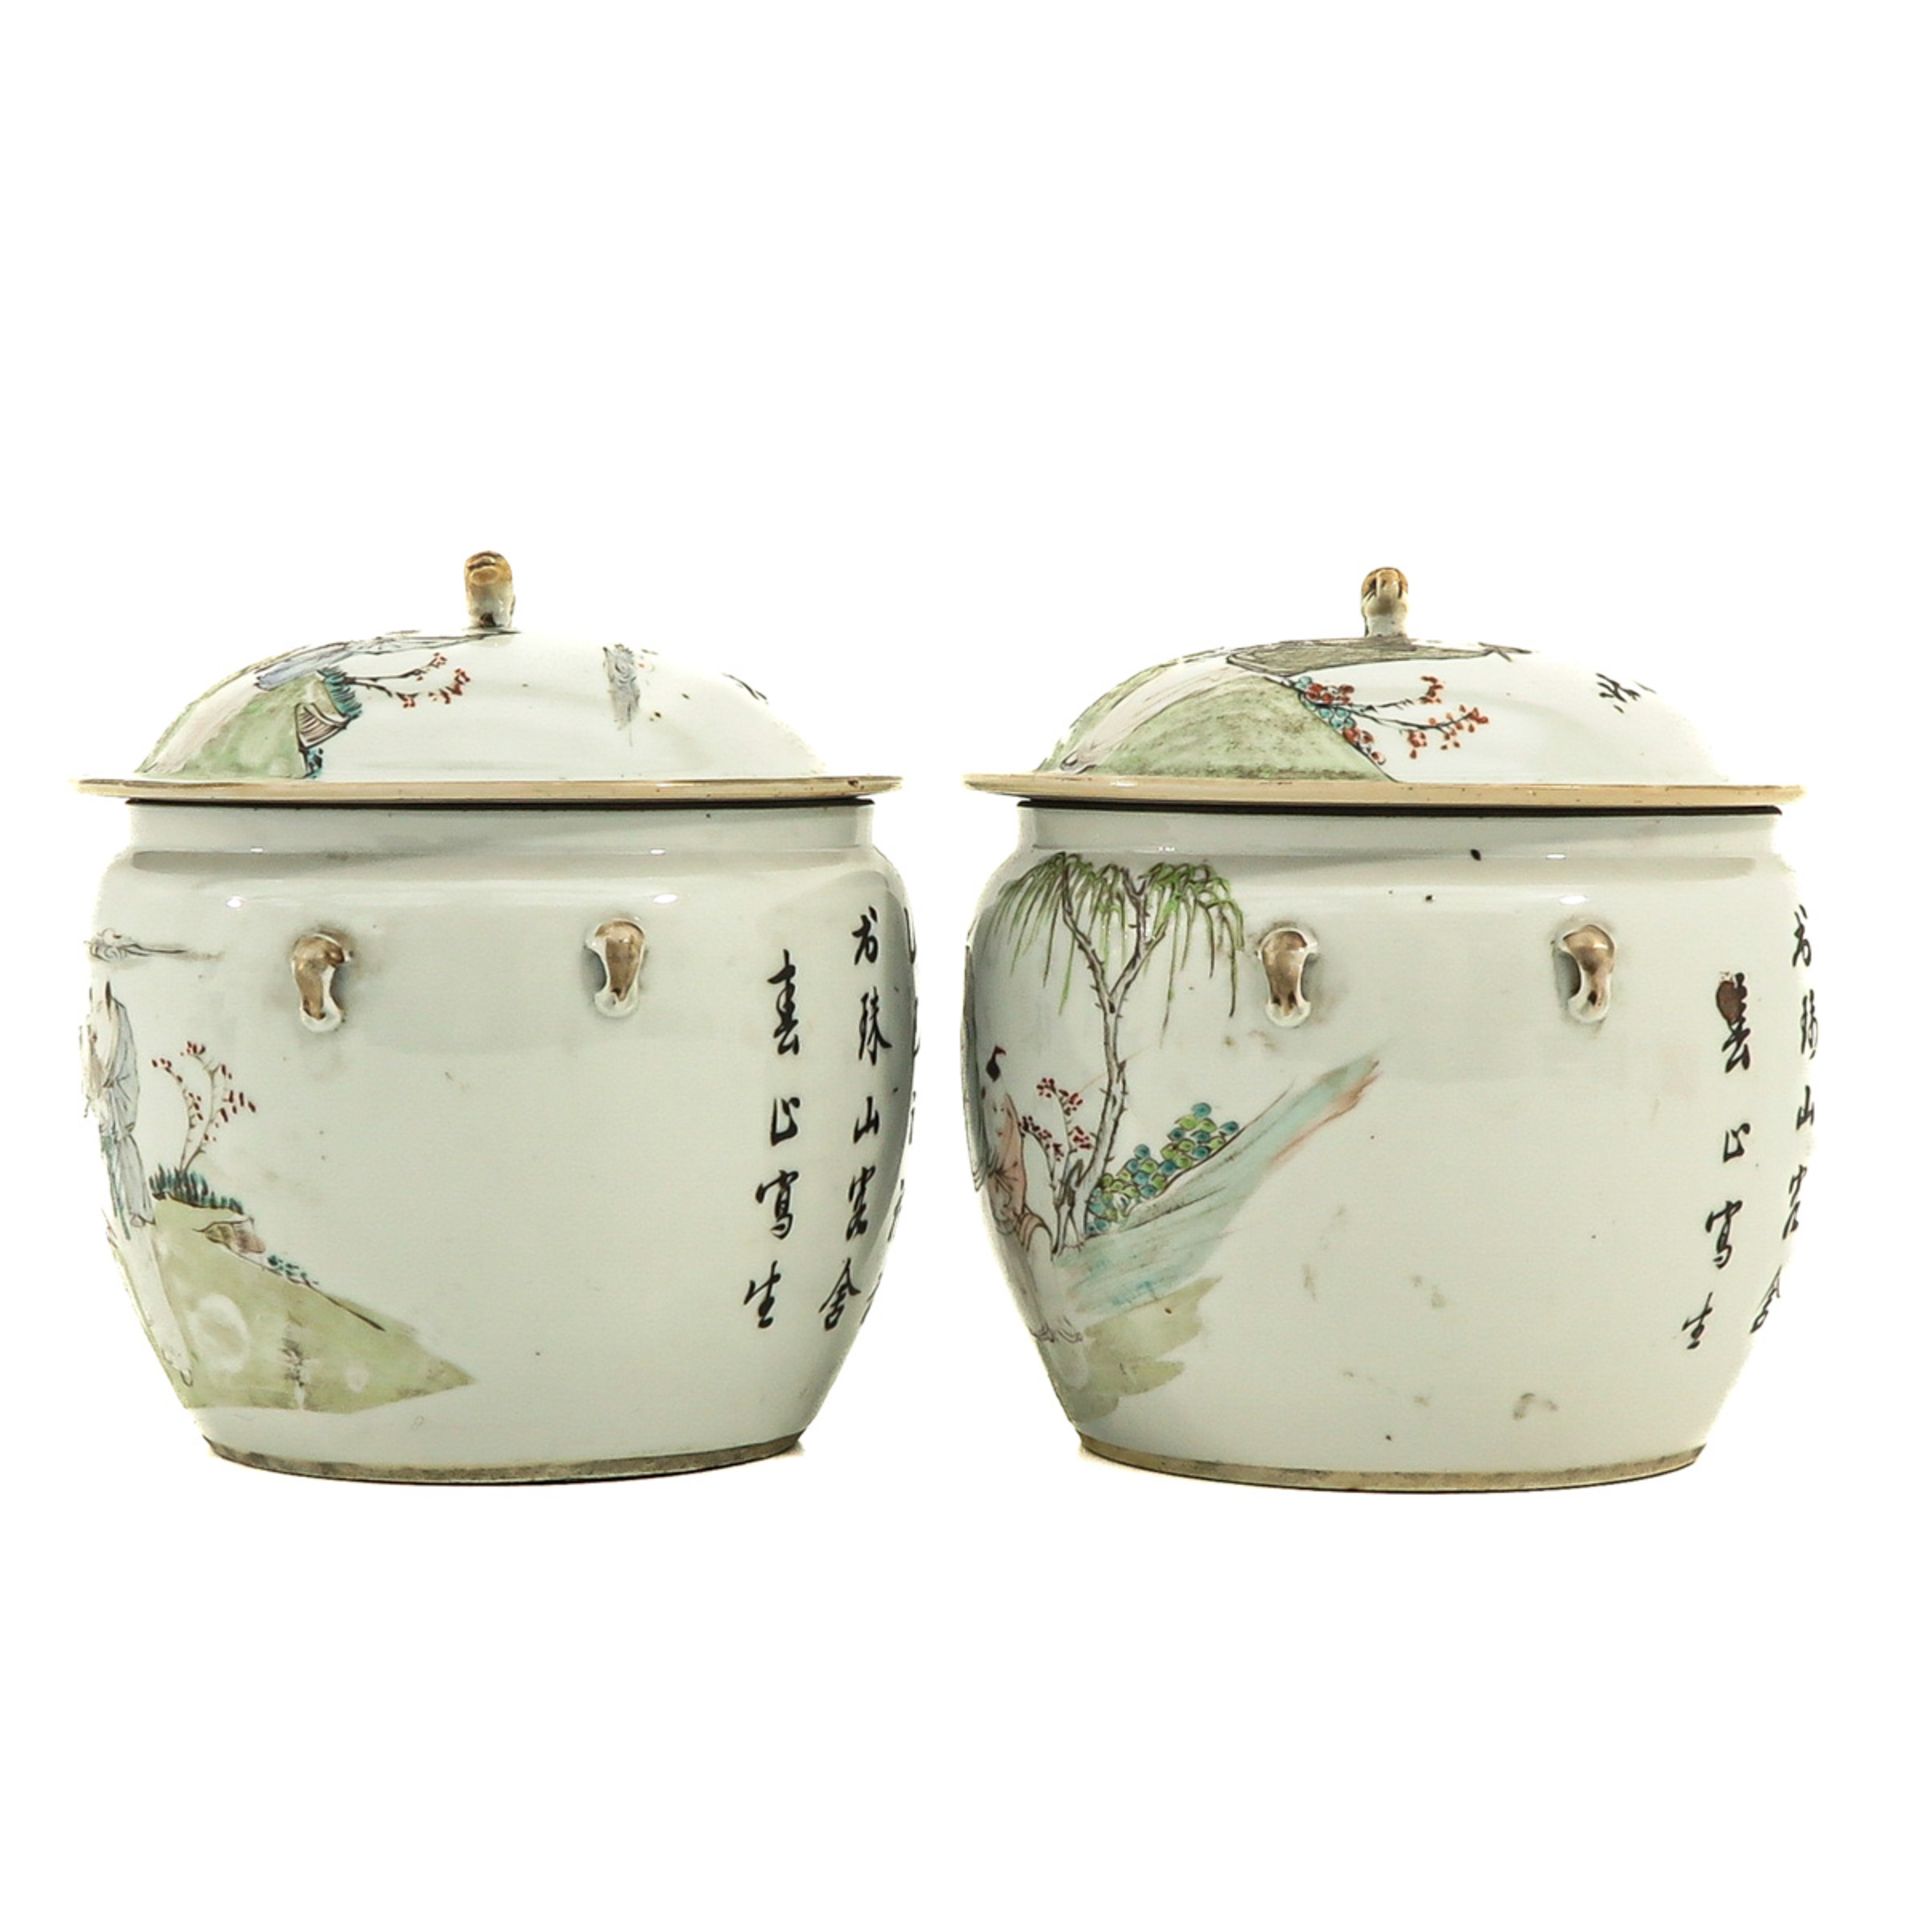 A Pair of Qianjiang Cai Decor Jars with Covers - Image 2 of 10